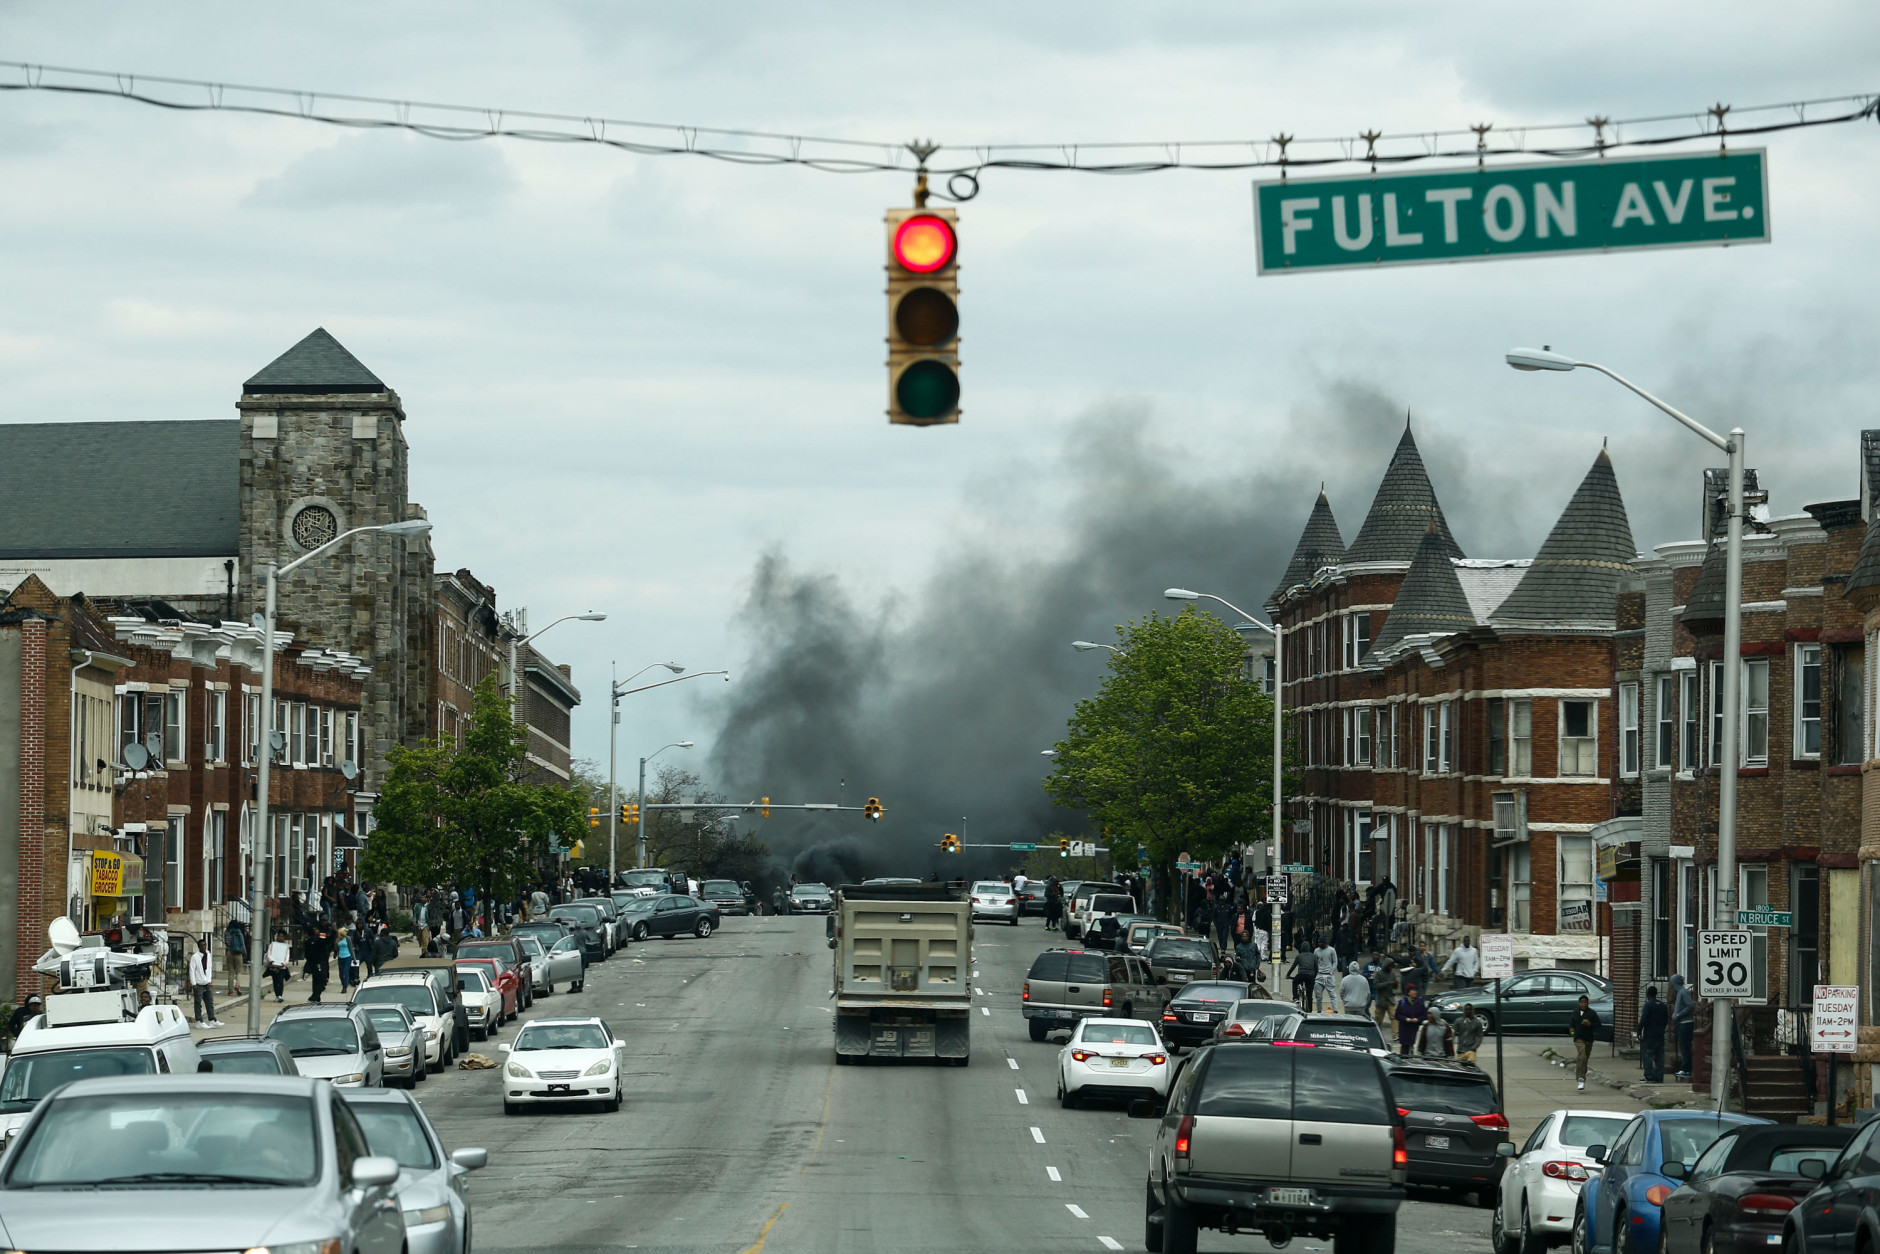 BALTIMORE, MD - APRIL 27: Smoke billows at the intersection of Pennsylvania Avenue and North Avenue (seen from Fulton Ave), April 27, 2015 in Baltimore, Maryland. Riots have erupted in Baltimore following the funeral service for Freddie Gray, who died last week while in Baltimore Police custody. (Photo by Drew Angerer/Getty Images)